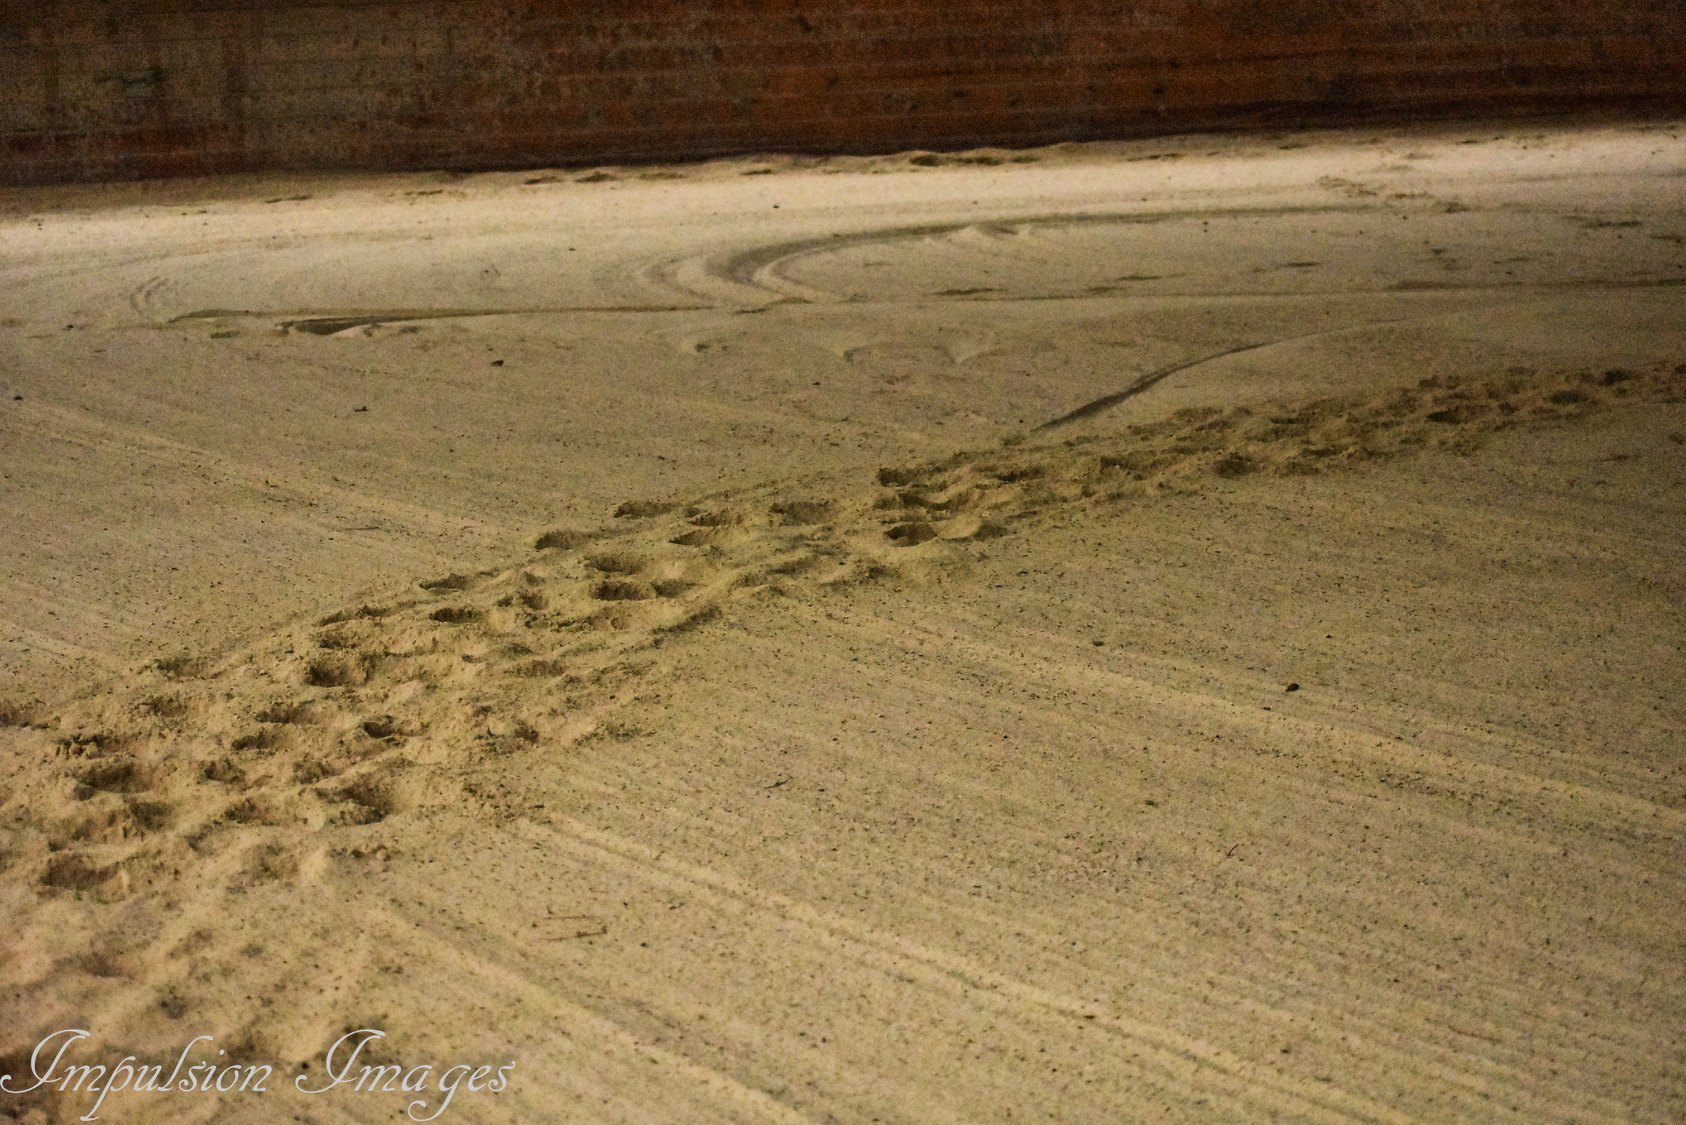 hoof imprints in arena sand showing circle with a narrow track